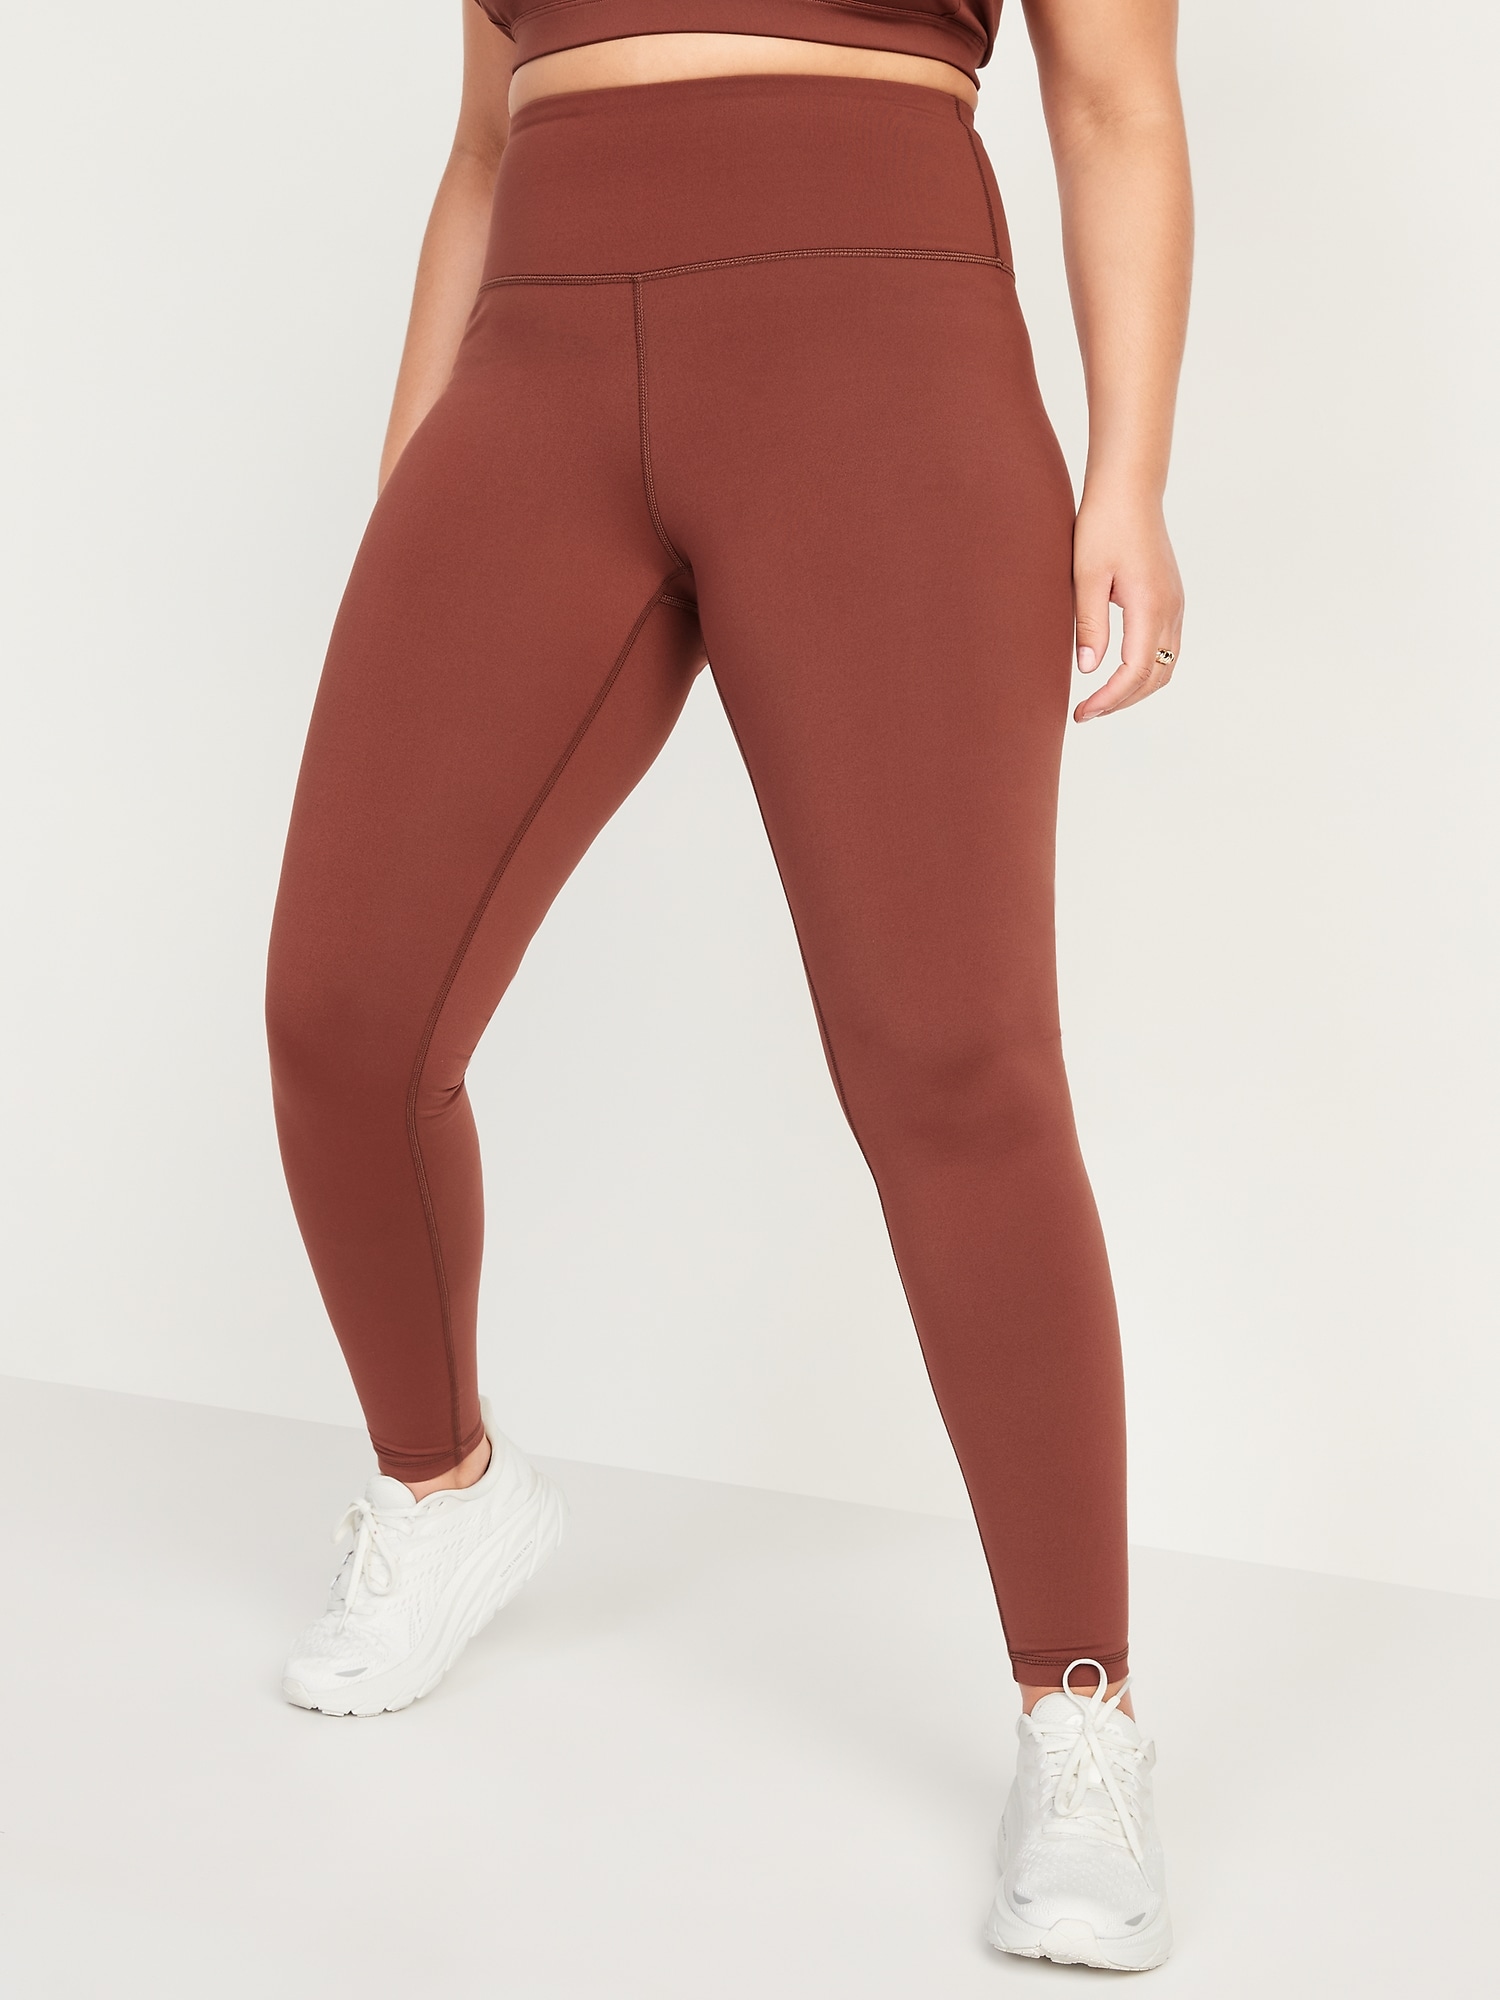 Old Navy High Waisted Compression Leggings - China Fitness Clothing